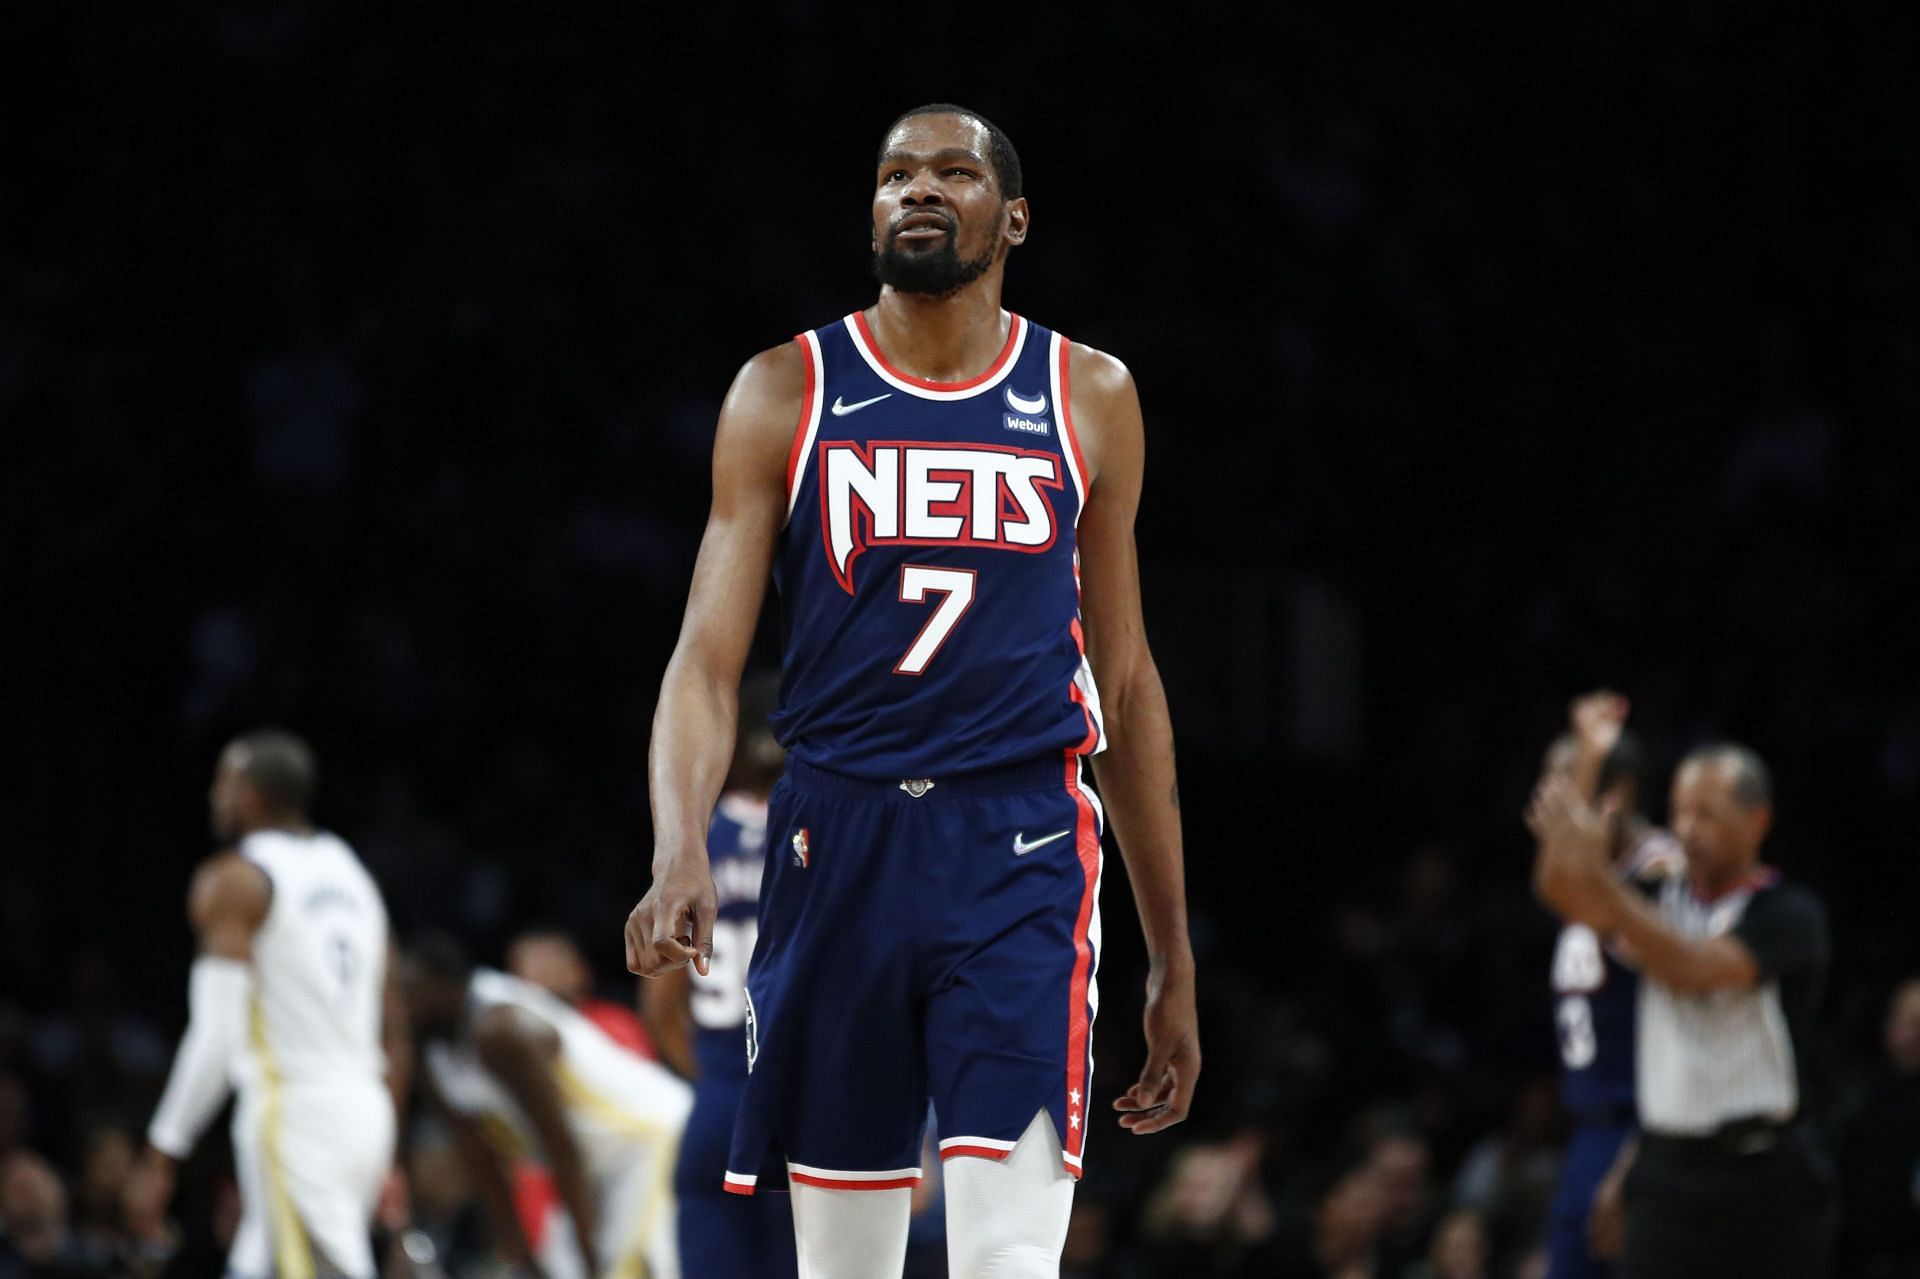 Kevin Durant and the Brooklyn Nets lost a measuring stick game against Steph Curry and the Golden State Warriors